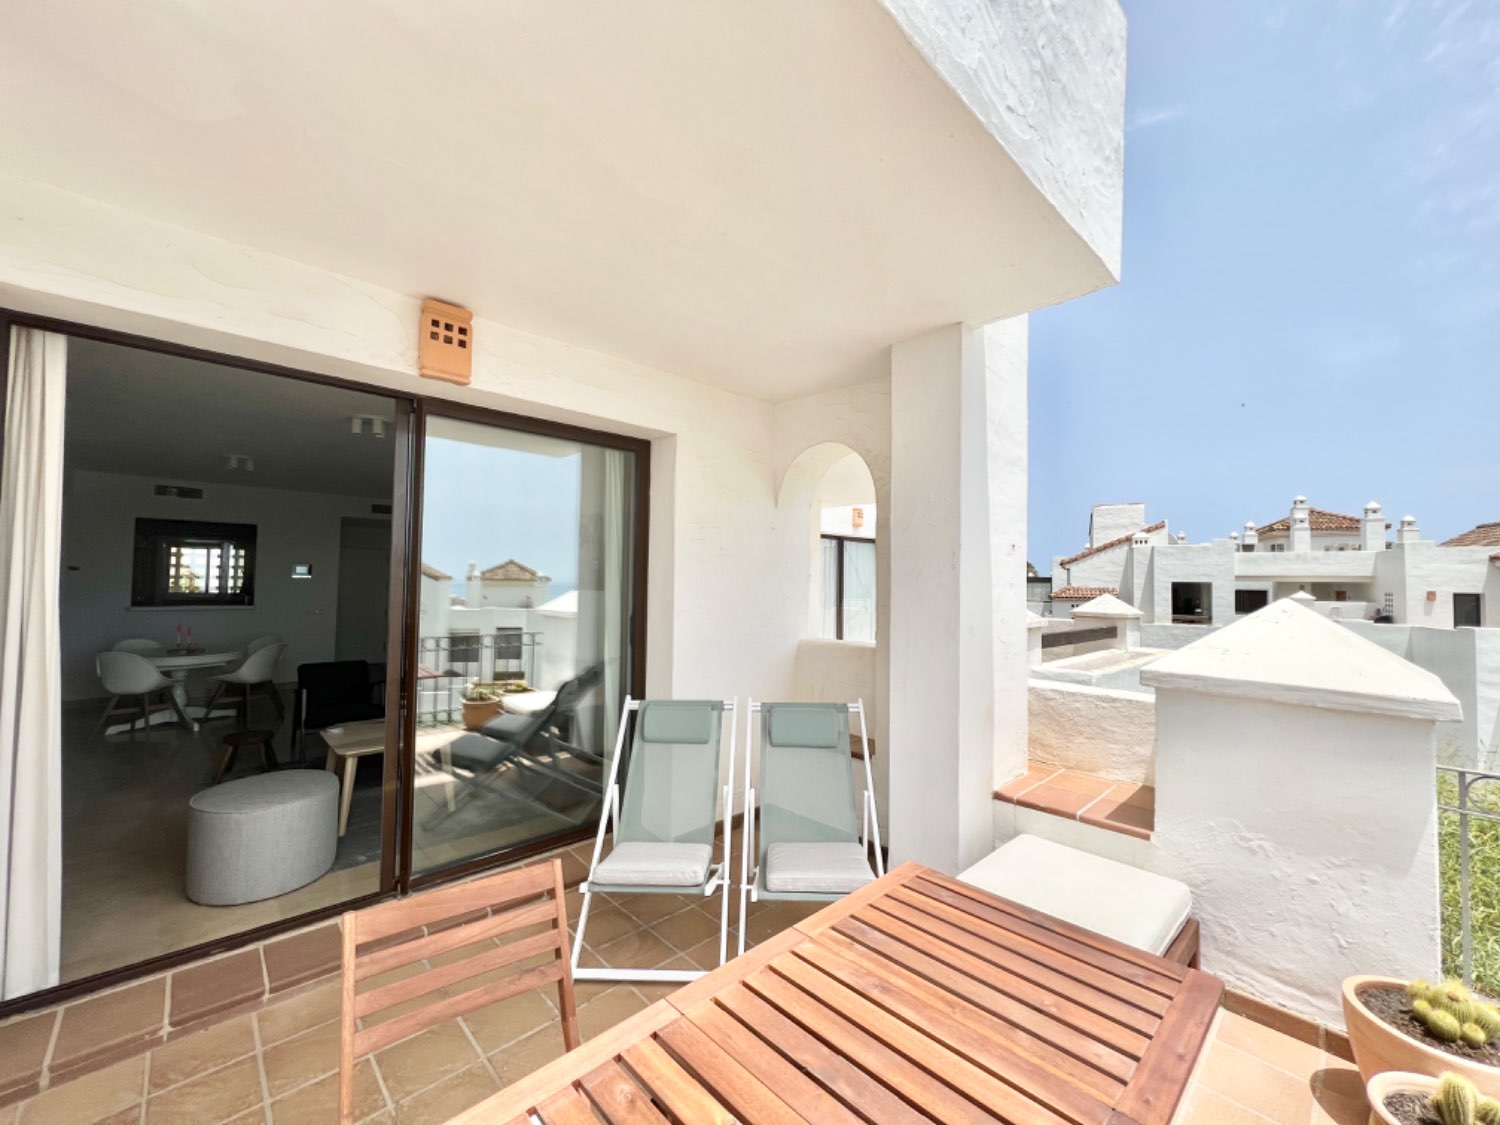 Beautiful views from this apartment a few meters away from the beach in Alcaidesa